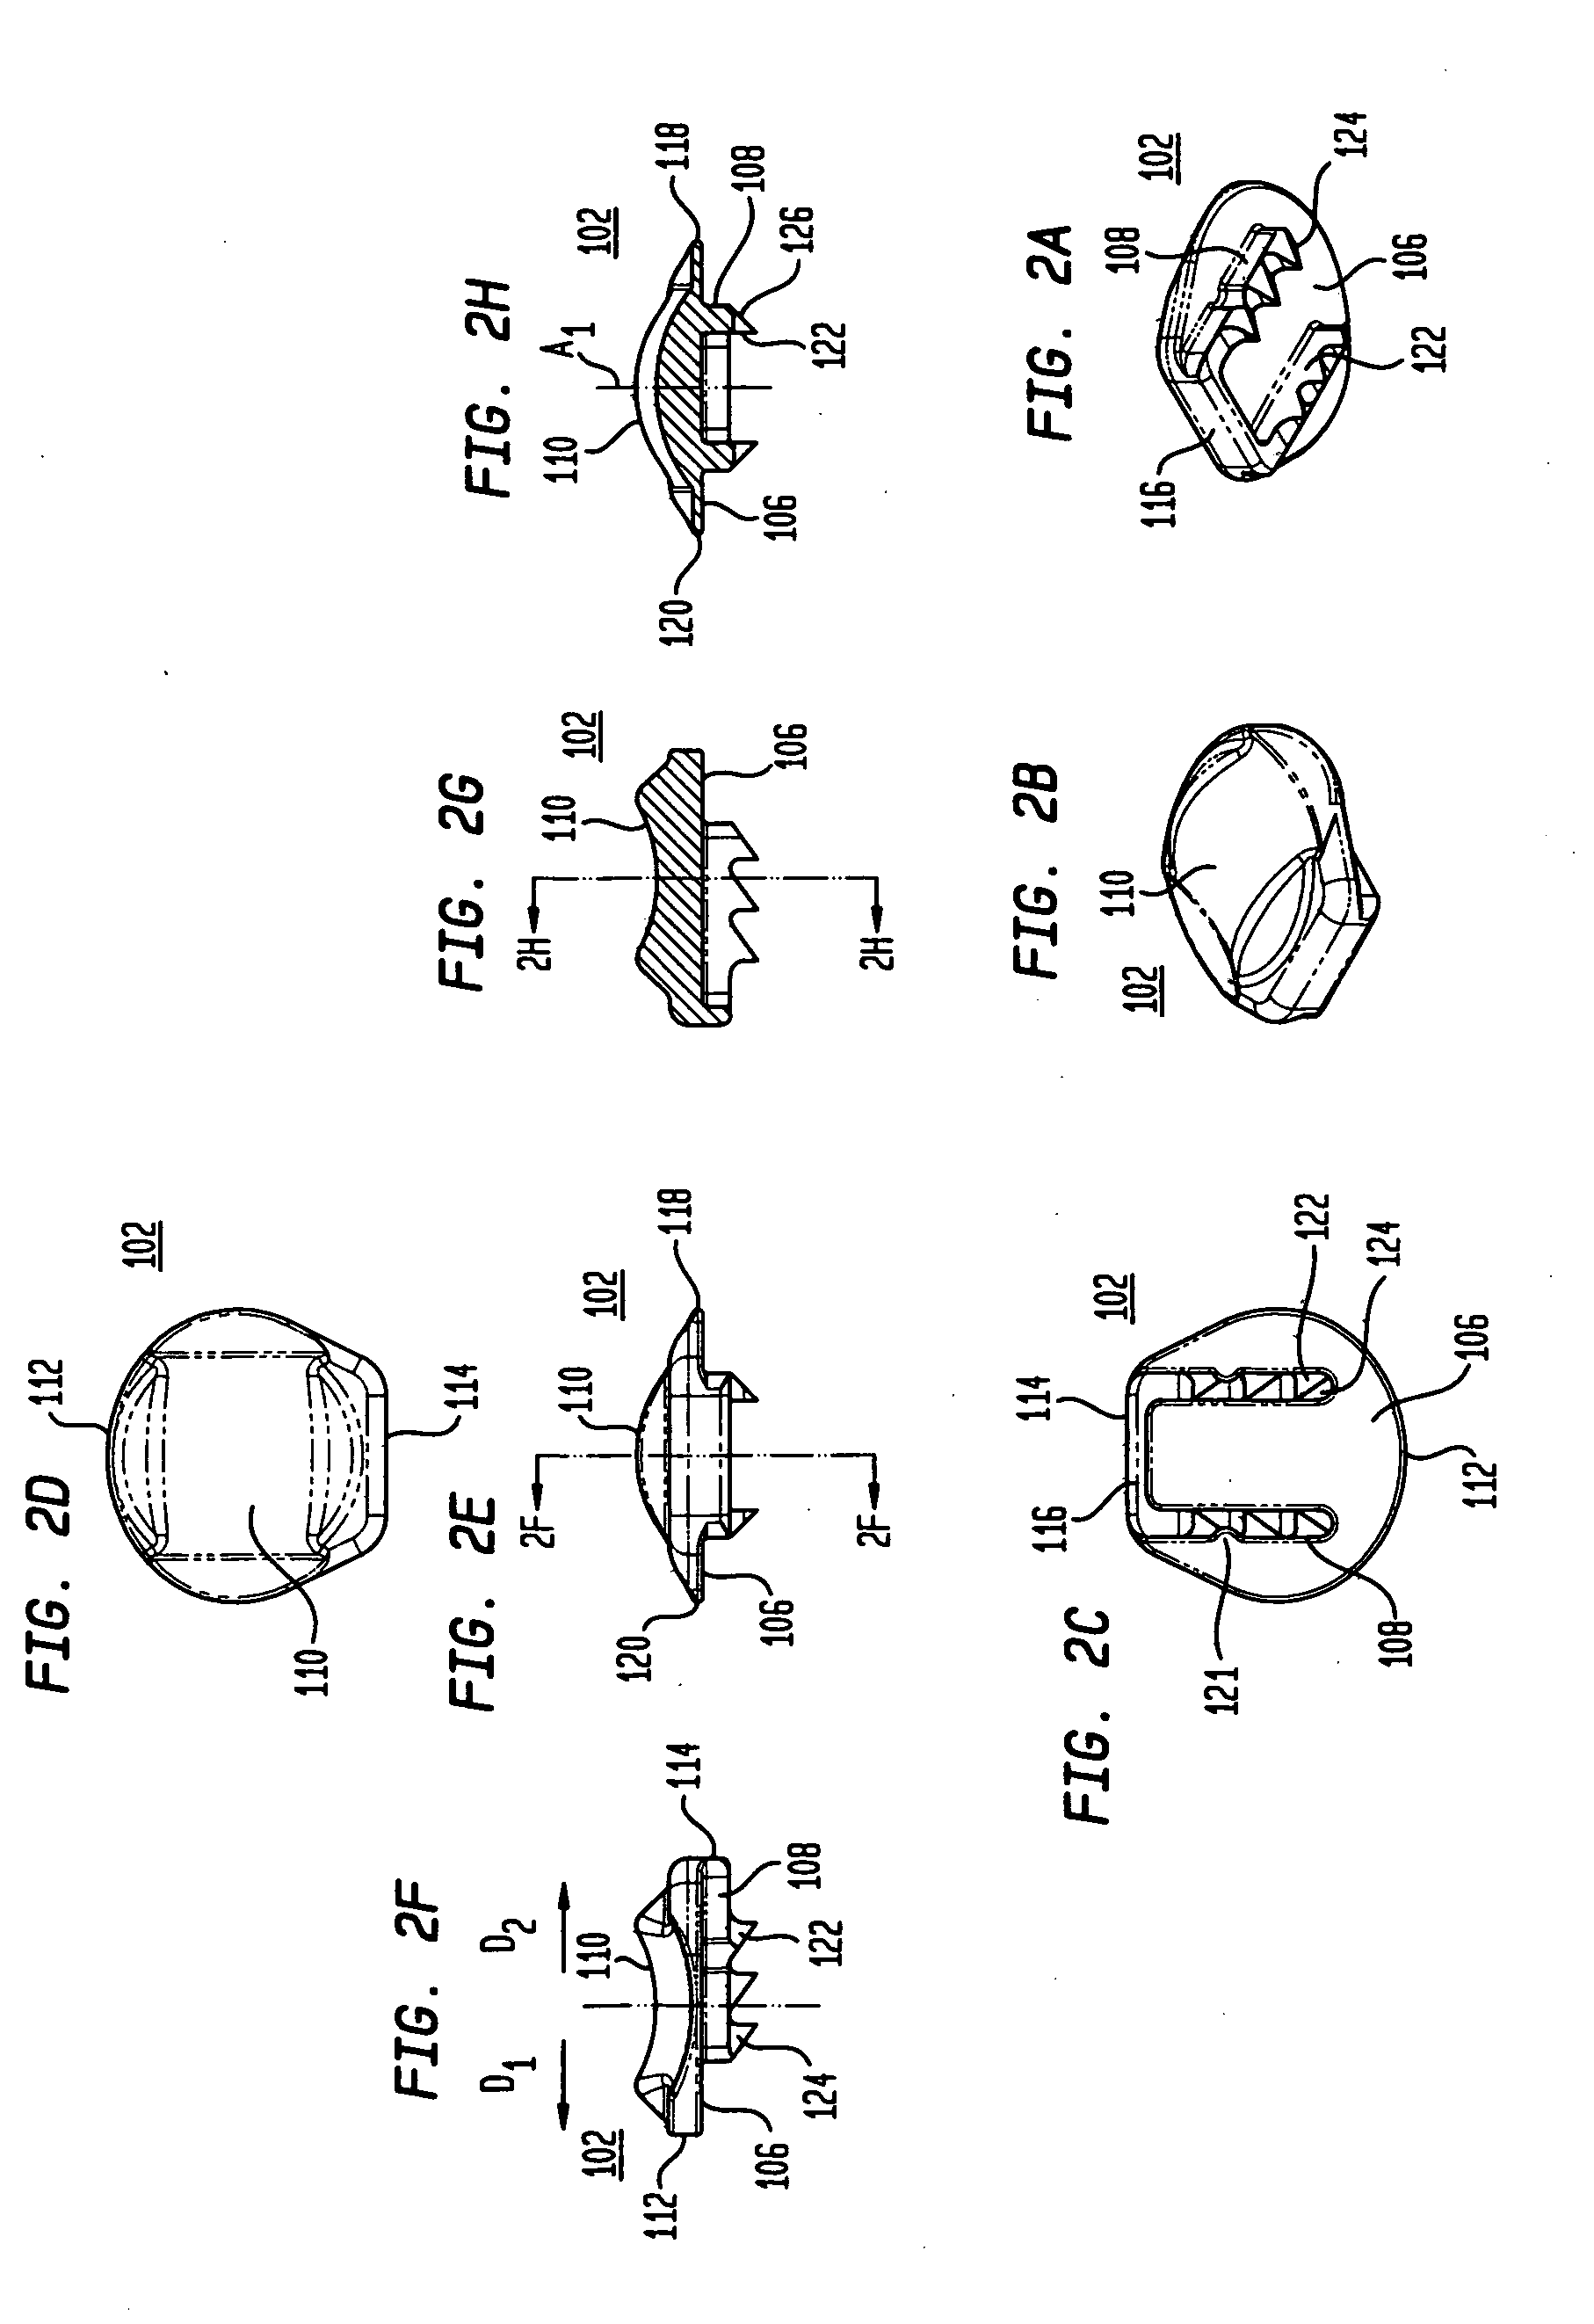 Instruments and methods for inserting artificial intervertebral implants